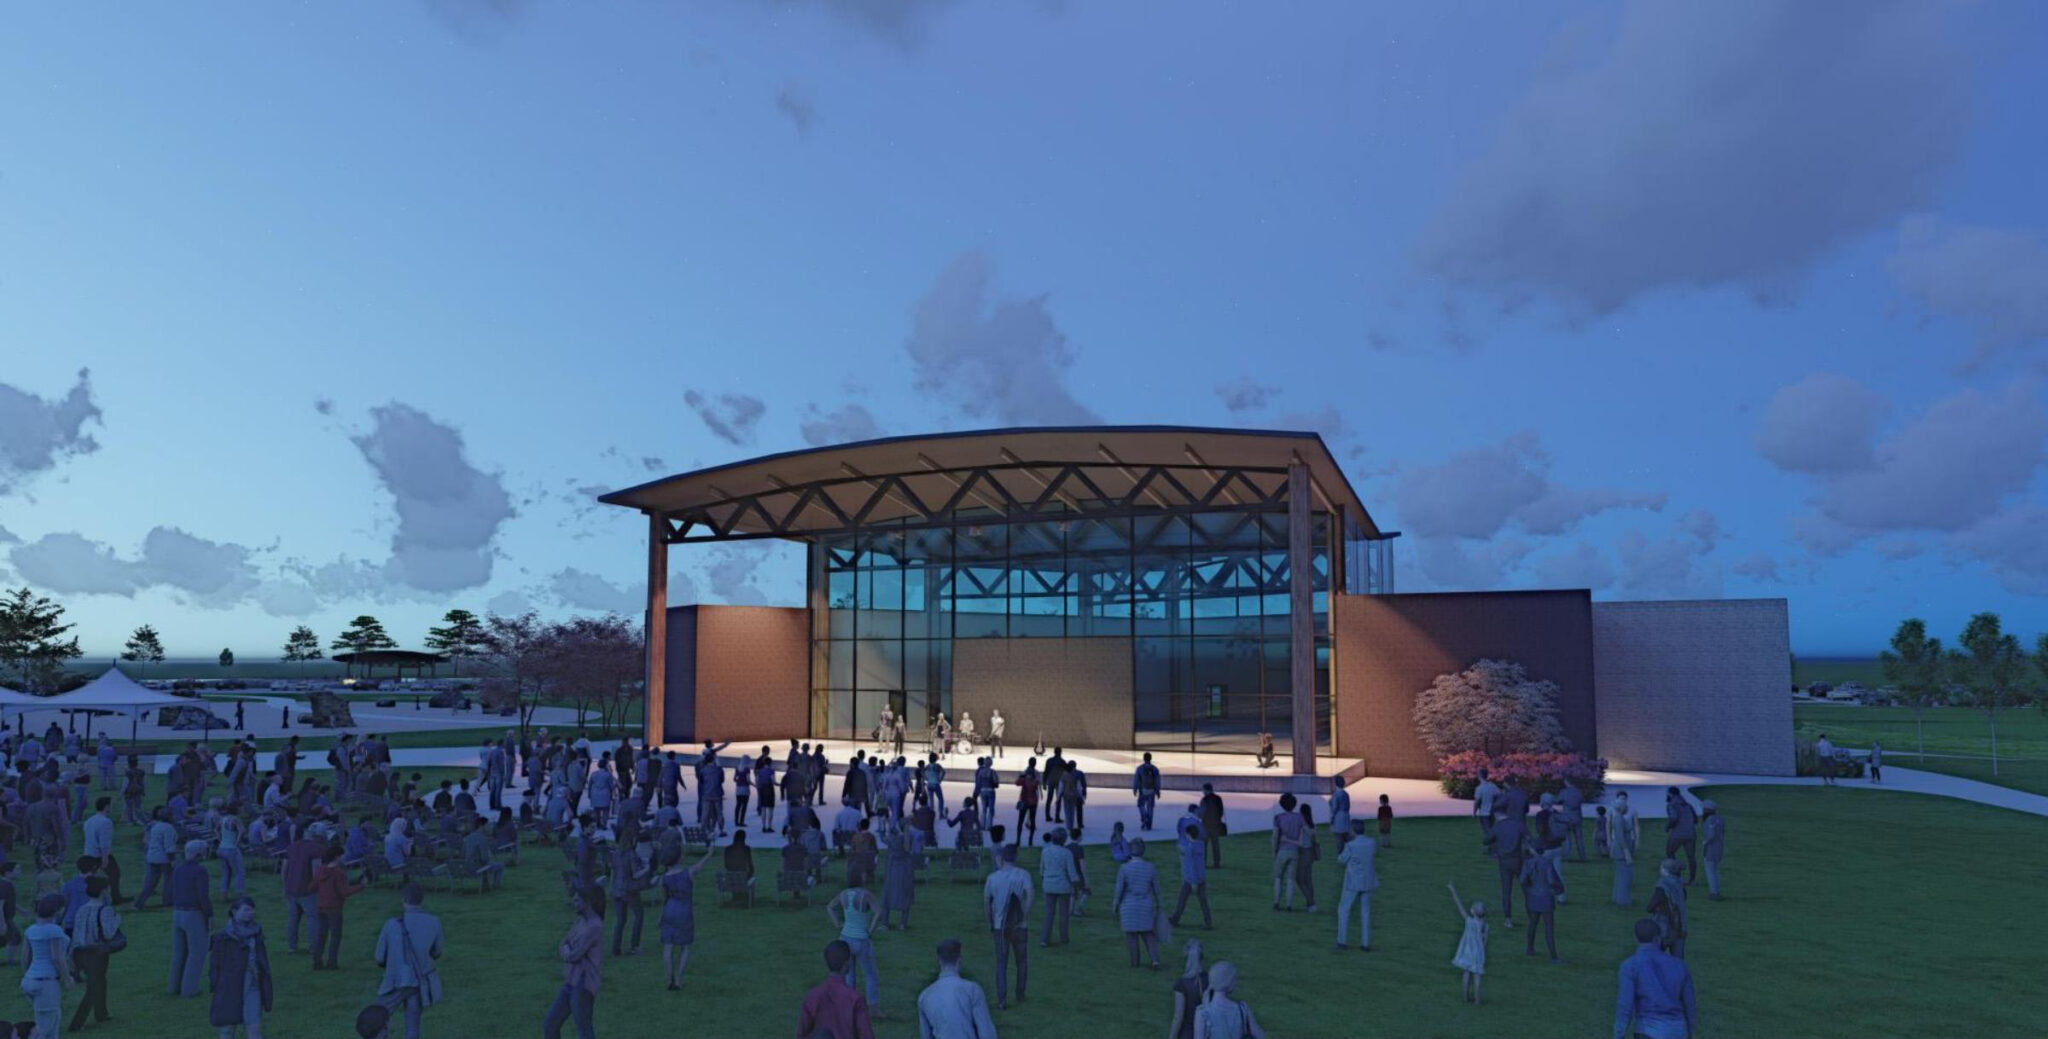 A rendering of the Centennial Center Stage at night.